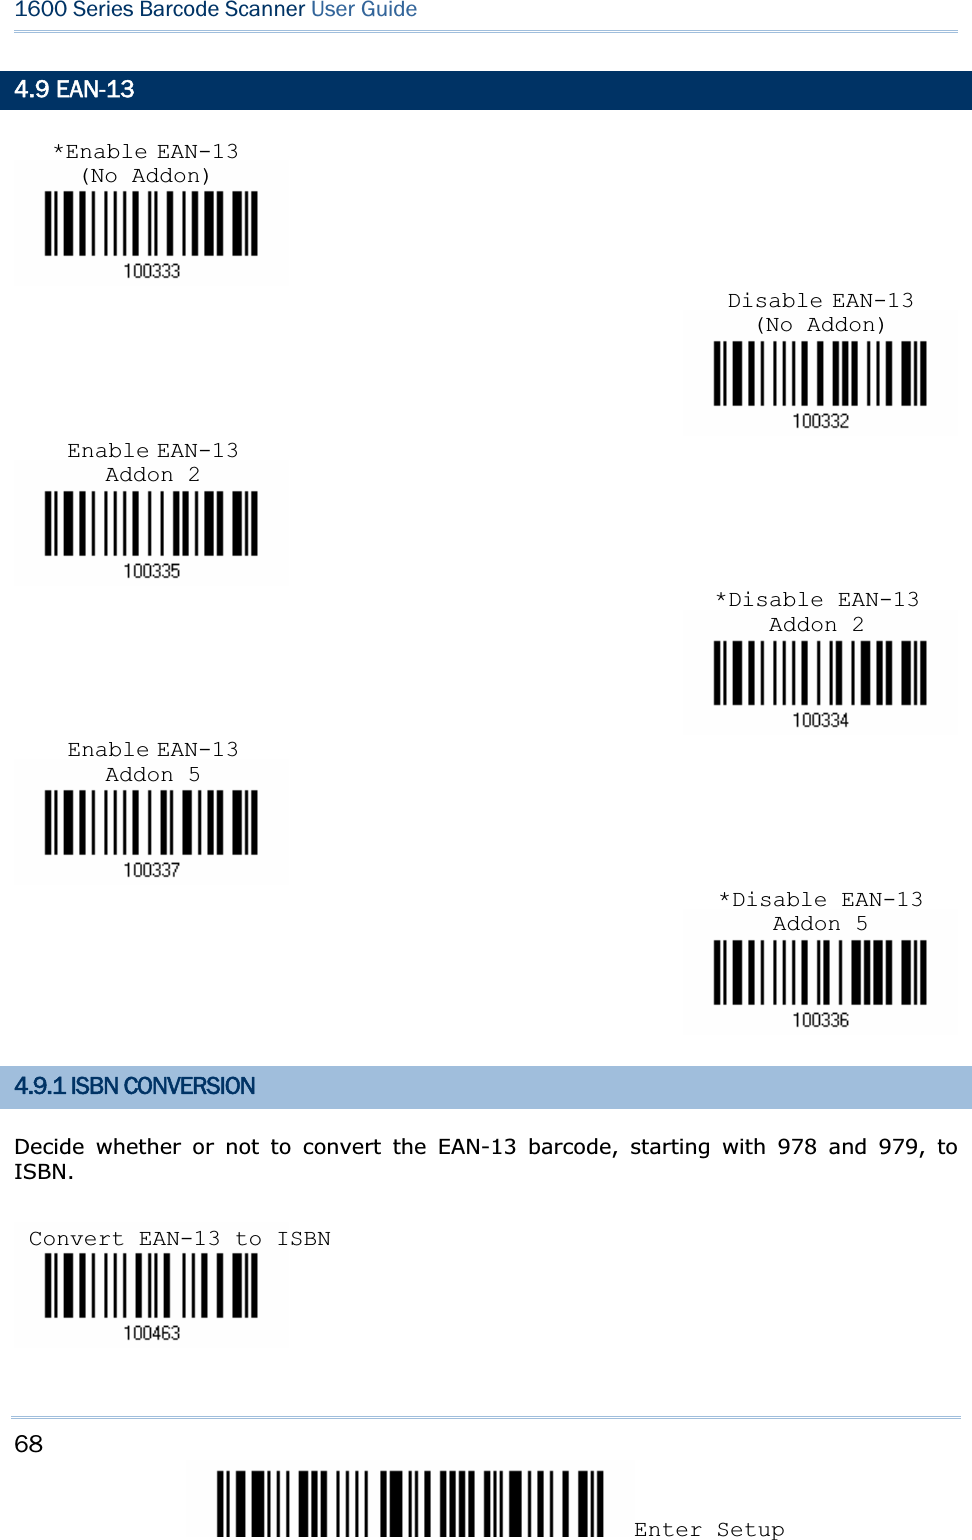 68Enter Setup 1600 Series Barcode Scanner User Guide4.9 EAN-13 4.9.1 ISBN CONVERSION Decide whether or not to convert the EAN-13 barcode, starting with 978 and 979, to ISBN.Disable EAN-13 (No Addon)*Disable EAN-13 Addon 2*Disable EAN-13 Addon 5Enable EAN-13 Addon 2Enable EAN-13 Addon 5*Enable EAN-13 (No Addon)Convert EAN-13 to ISBN